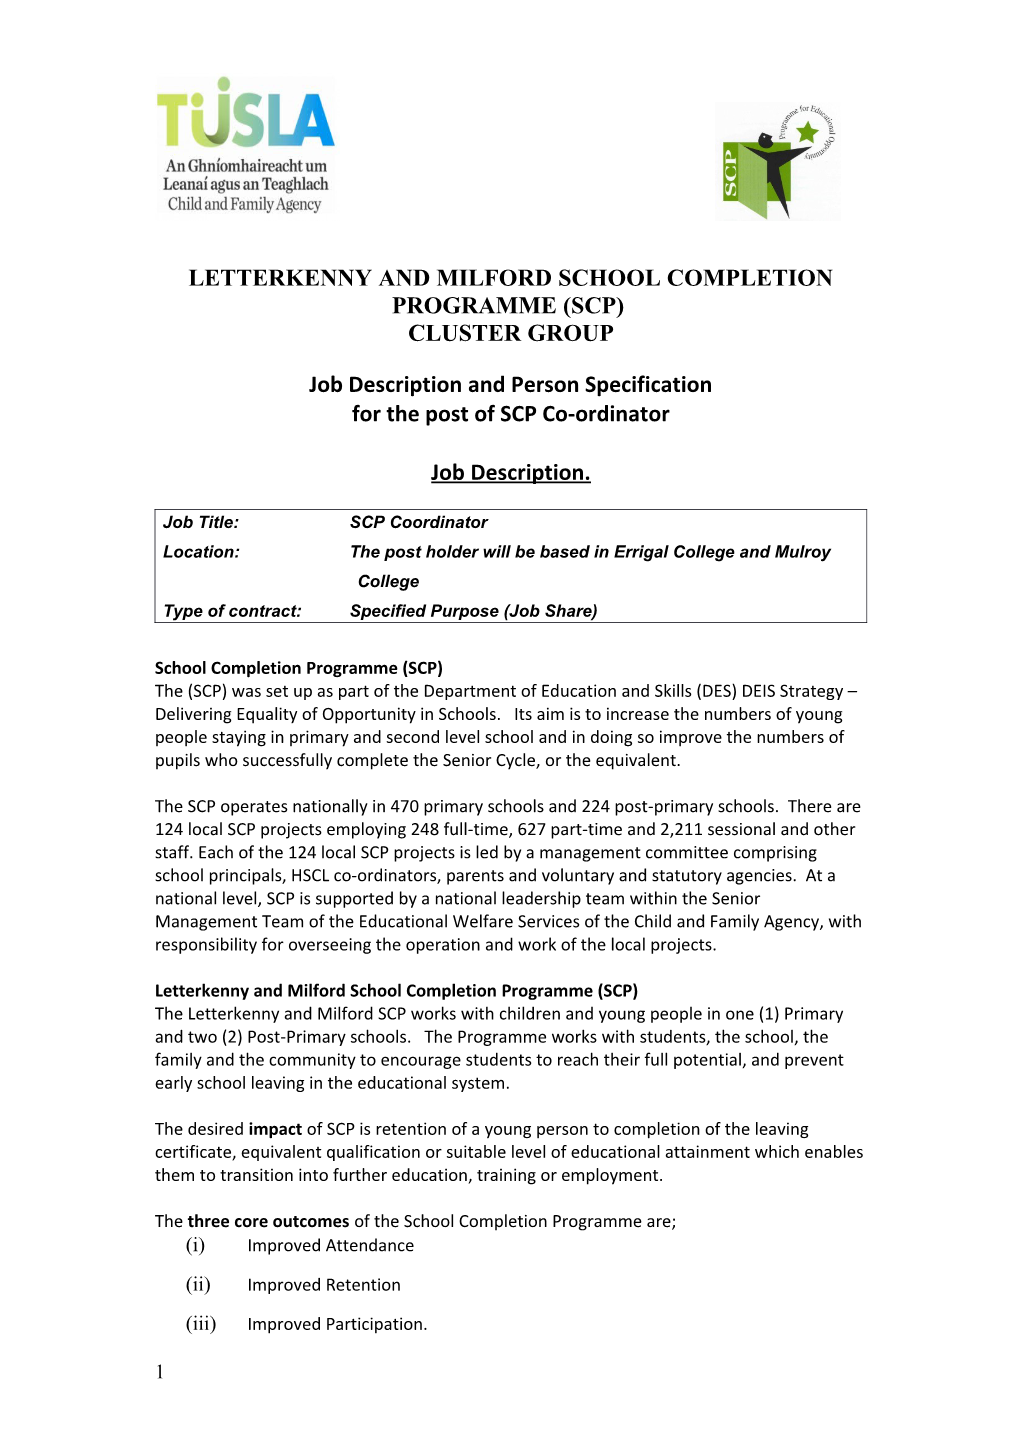 Letterkenny and Milford School Completion Programme (Scp)